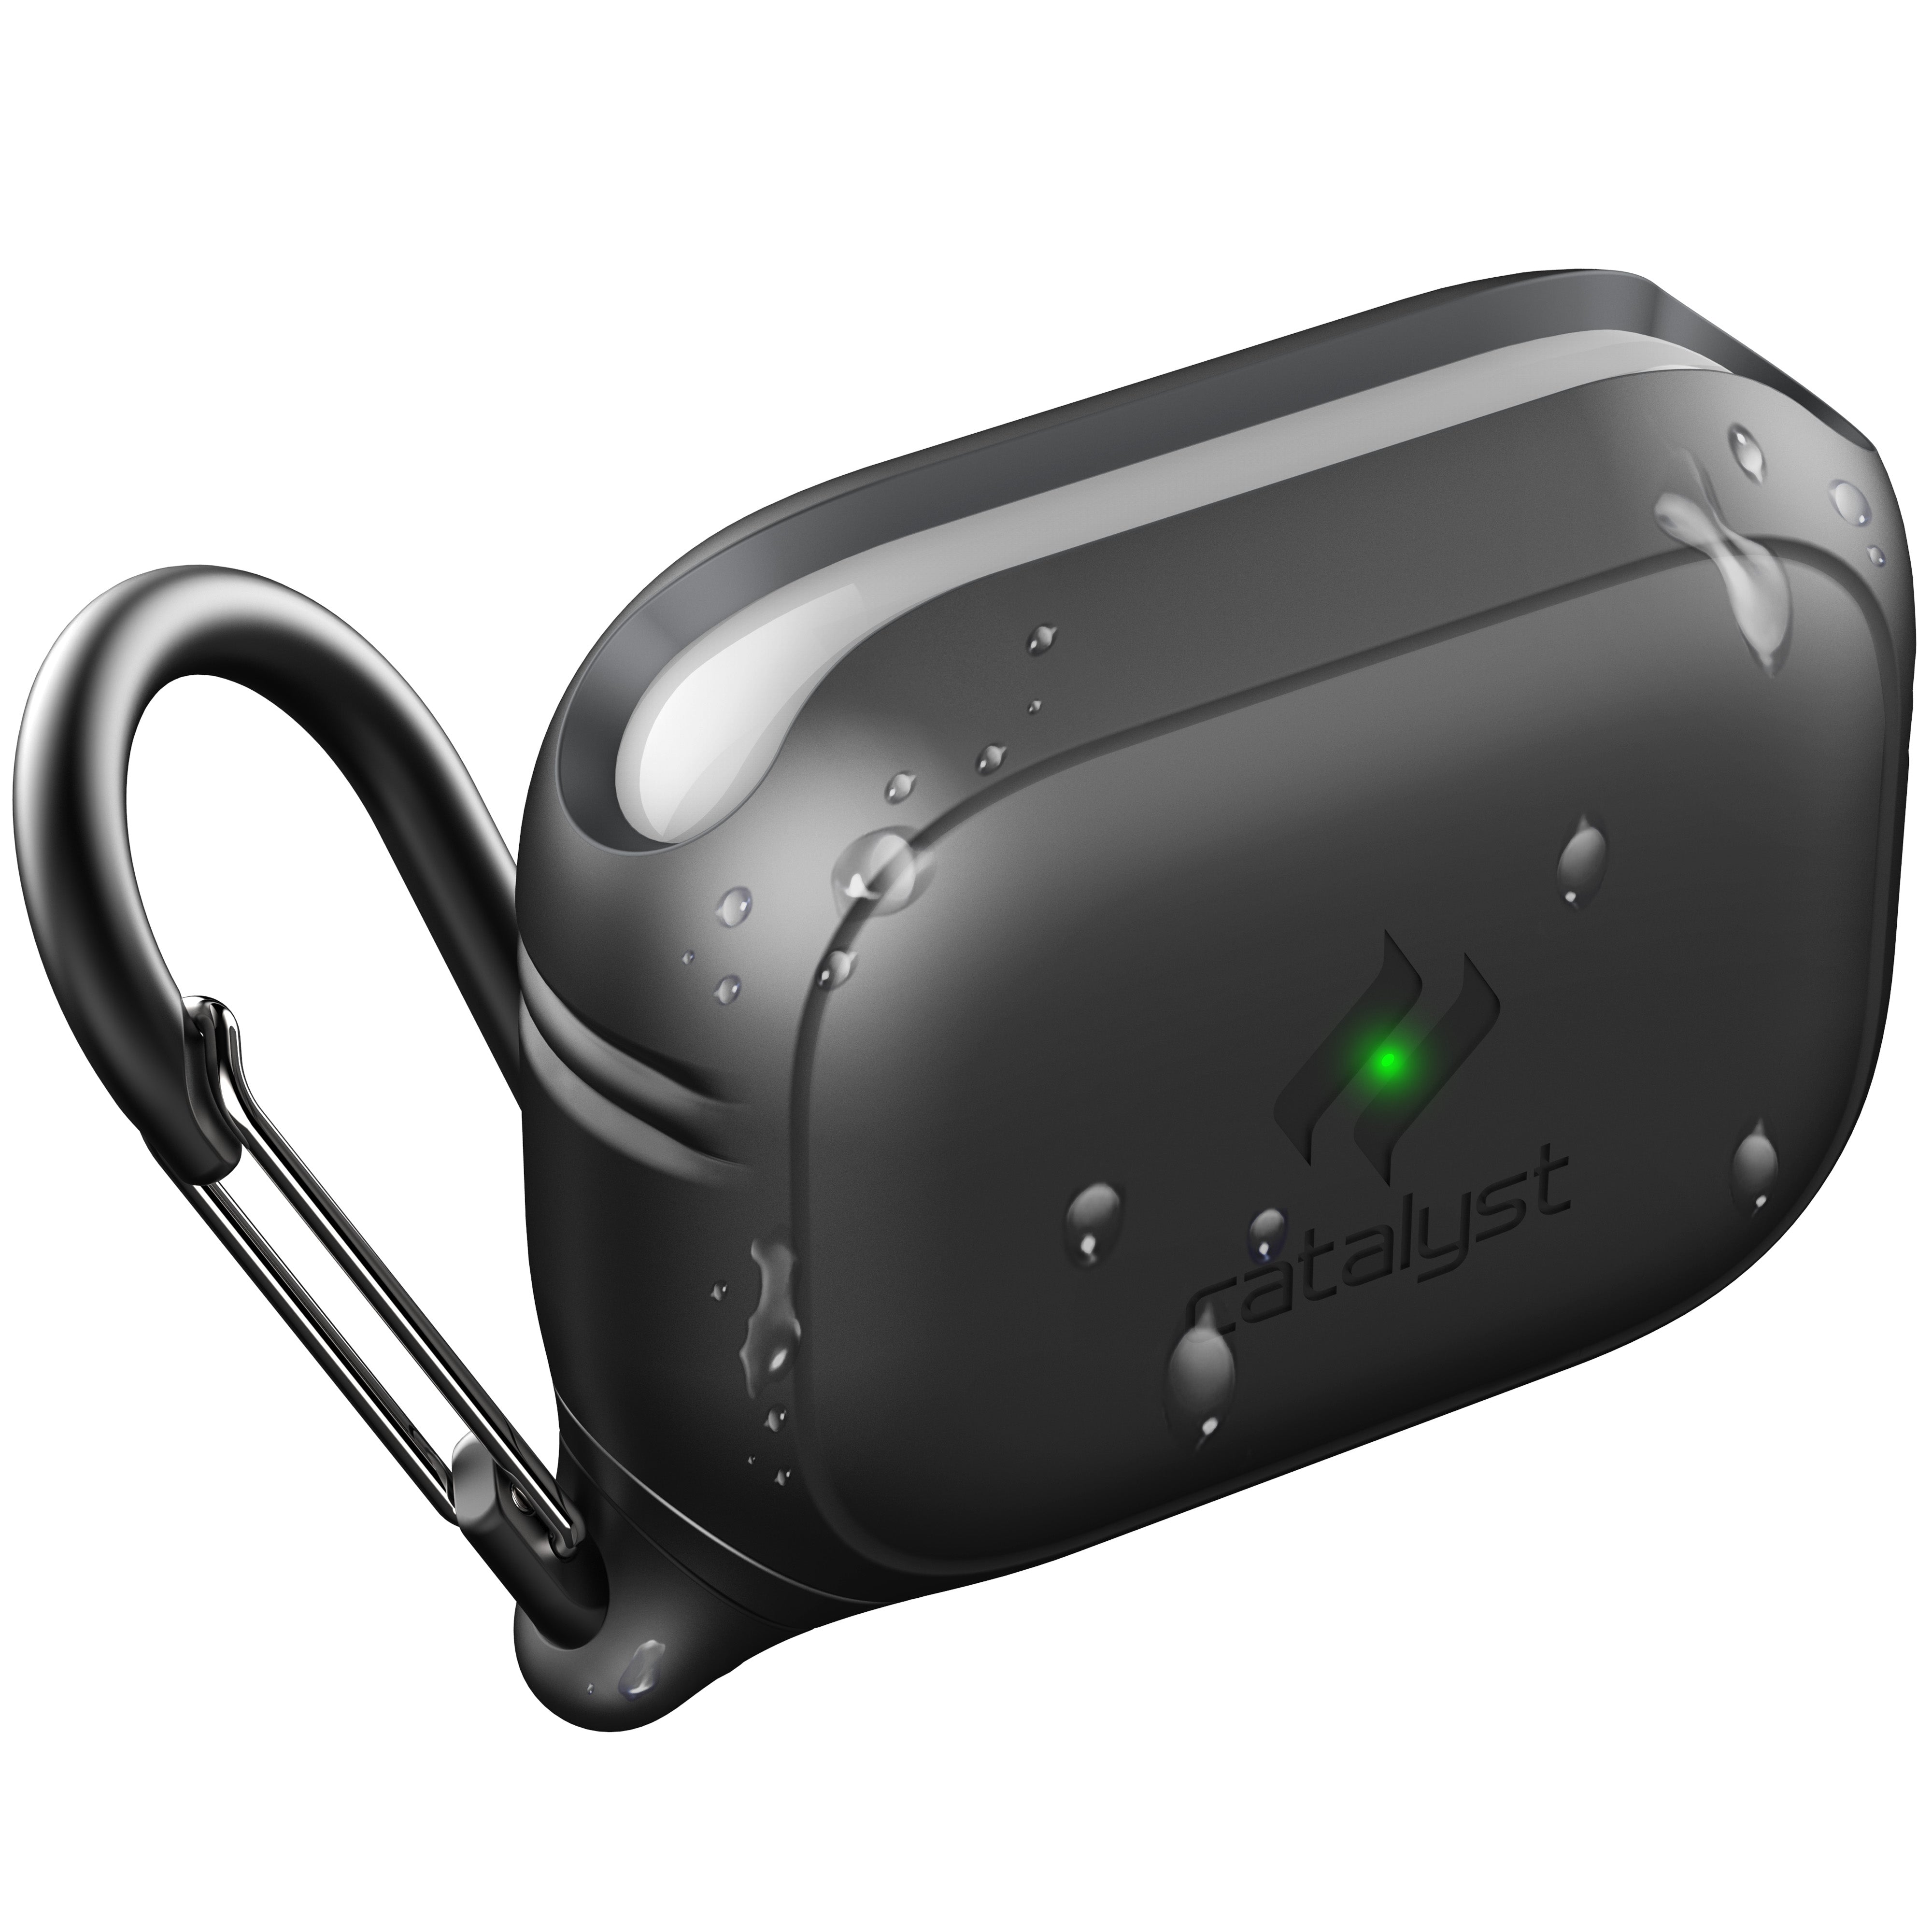 CATAPDPROBLK | catalyst airpods pro gen 2 1 waterproof case carabiner stealth black front view with green charge light visible through the case